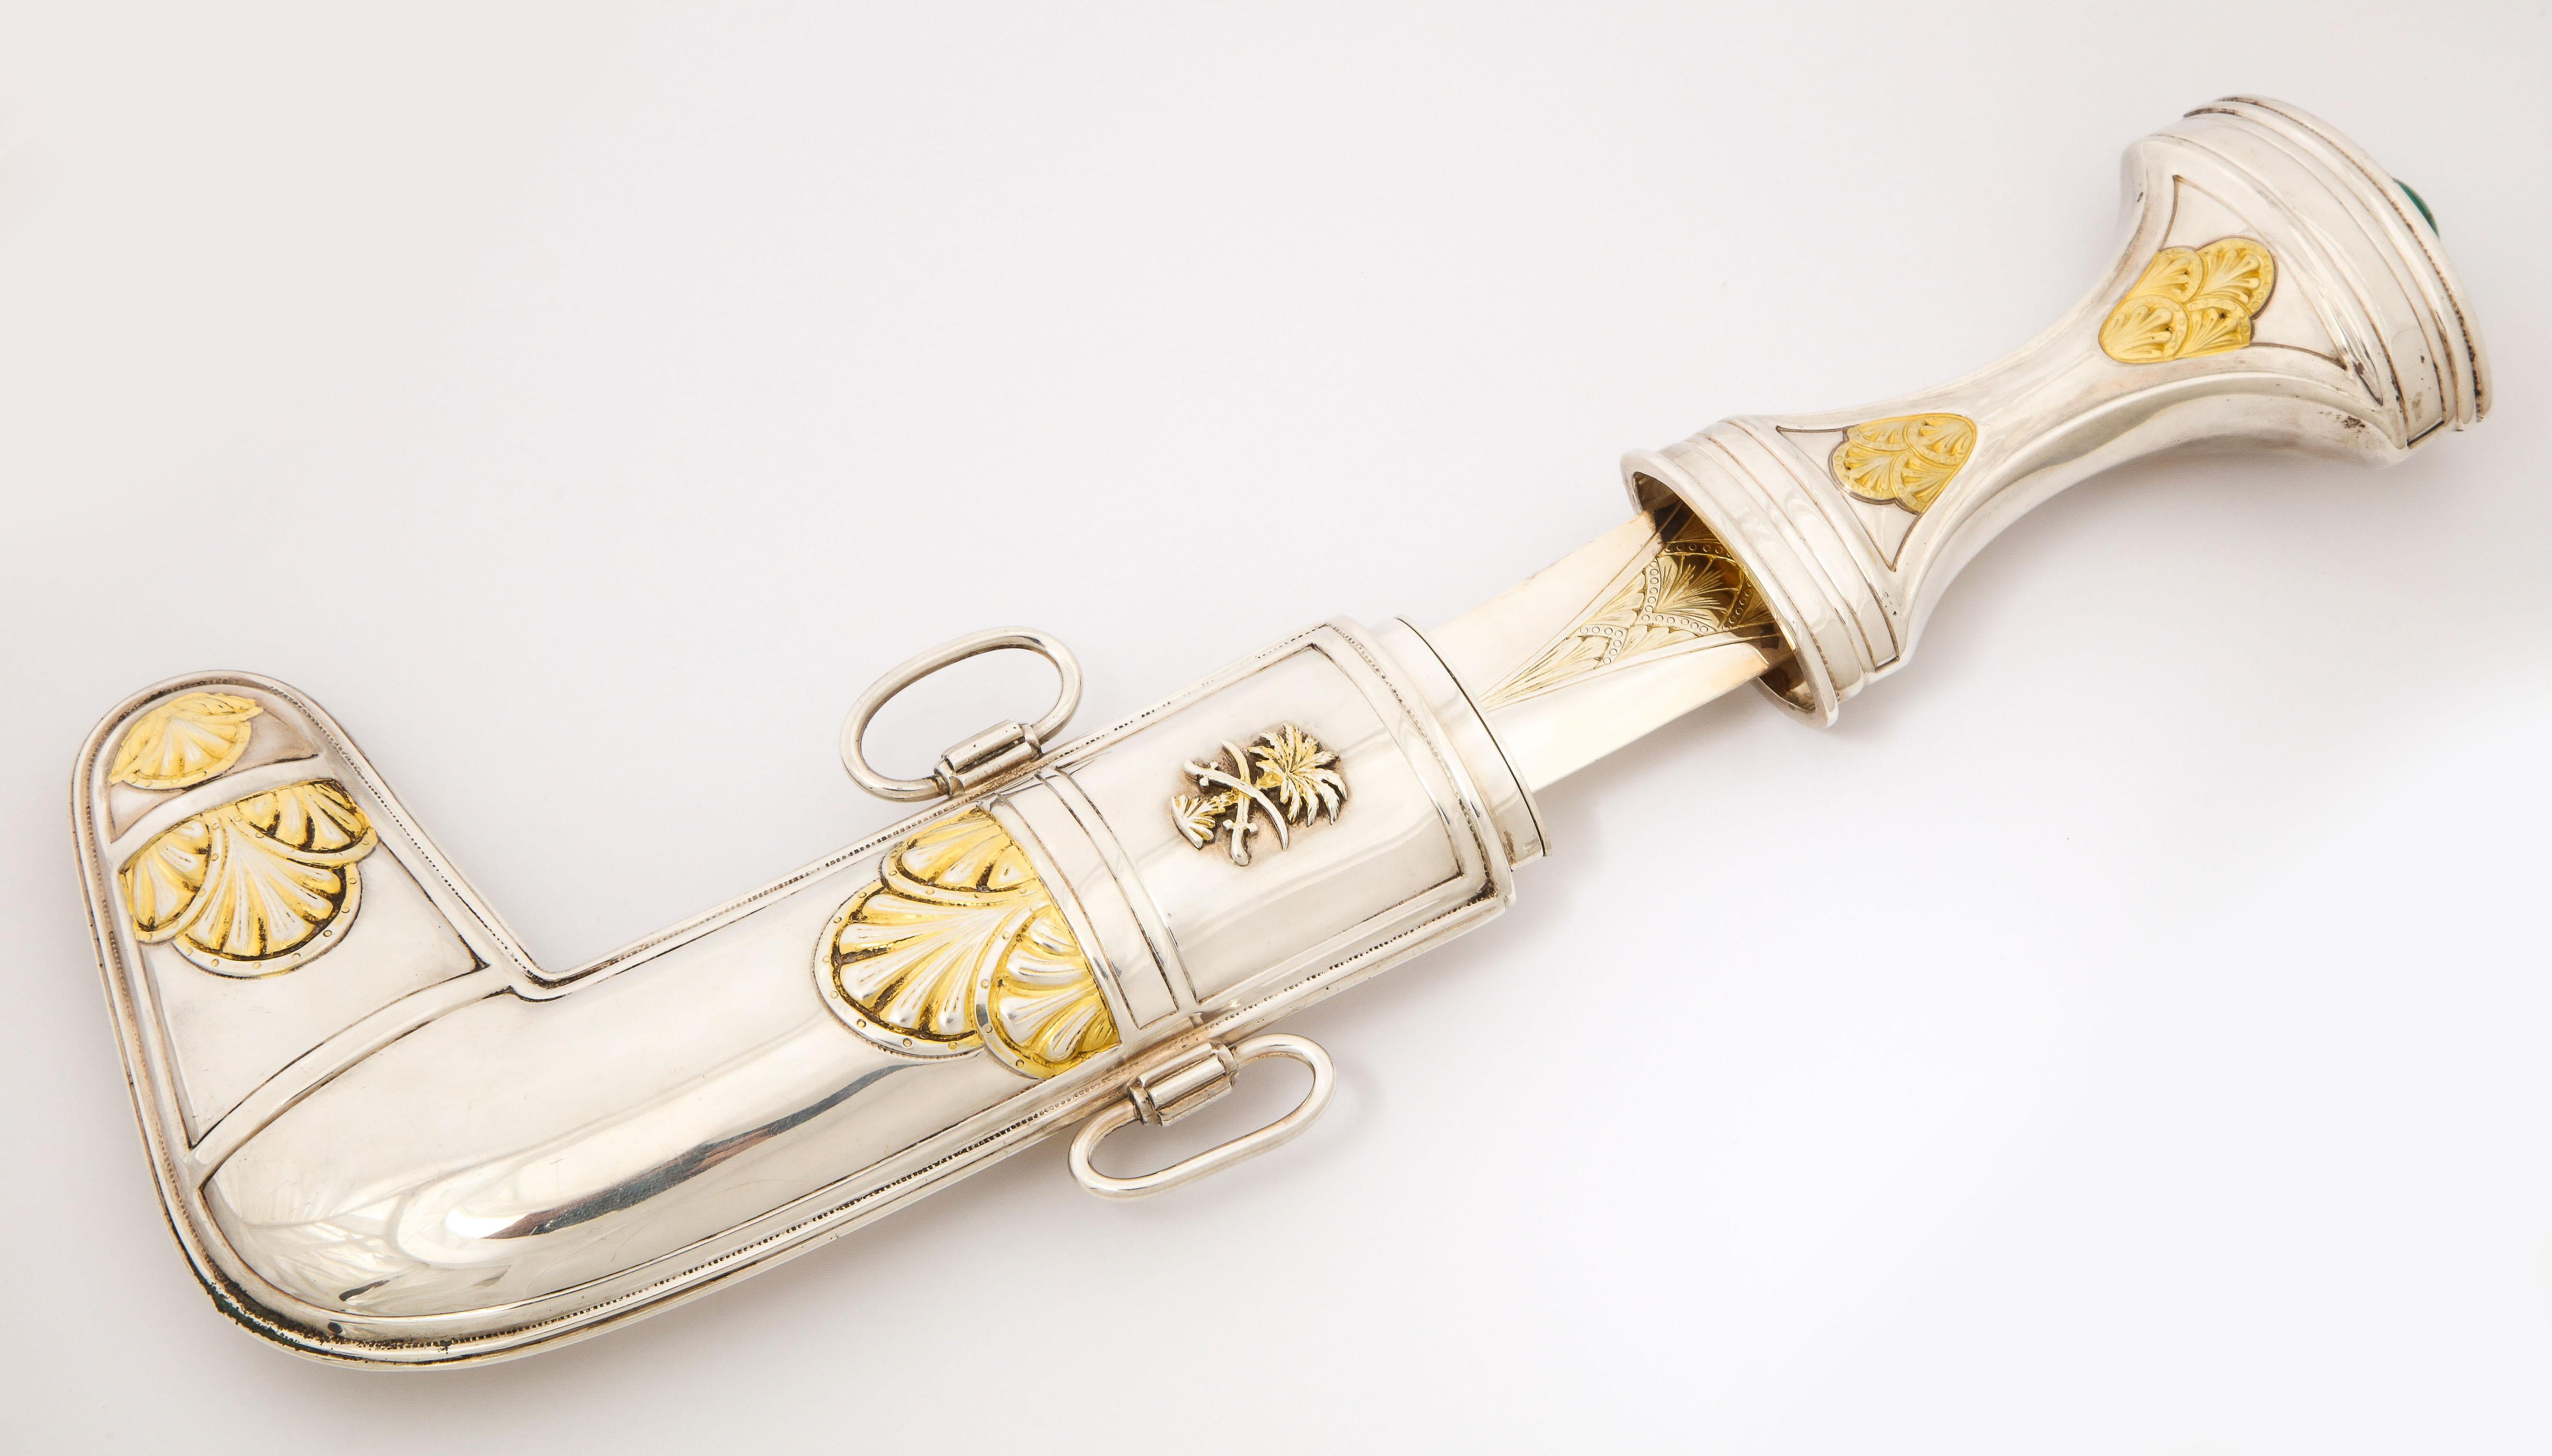 A Royal Saudi Arabian Islamic silver and silver-gilt Jambiya Khanjar Dagger with Malachite, circa 1970.

This was made in Saudi Arabia by local master silversmiths and jewelers and was used to be given as a traditional gift by the Royal